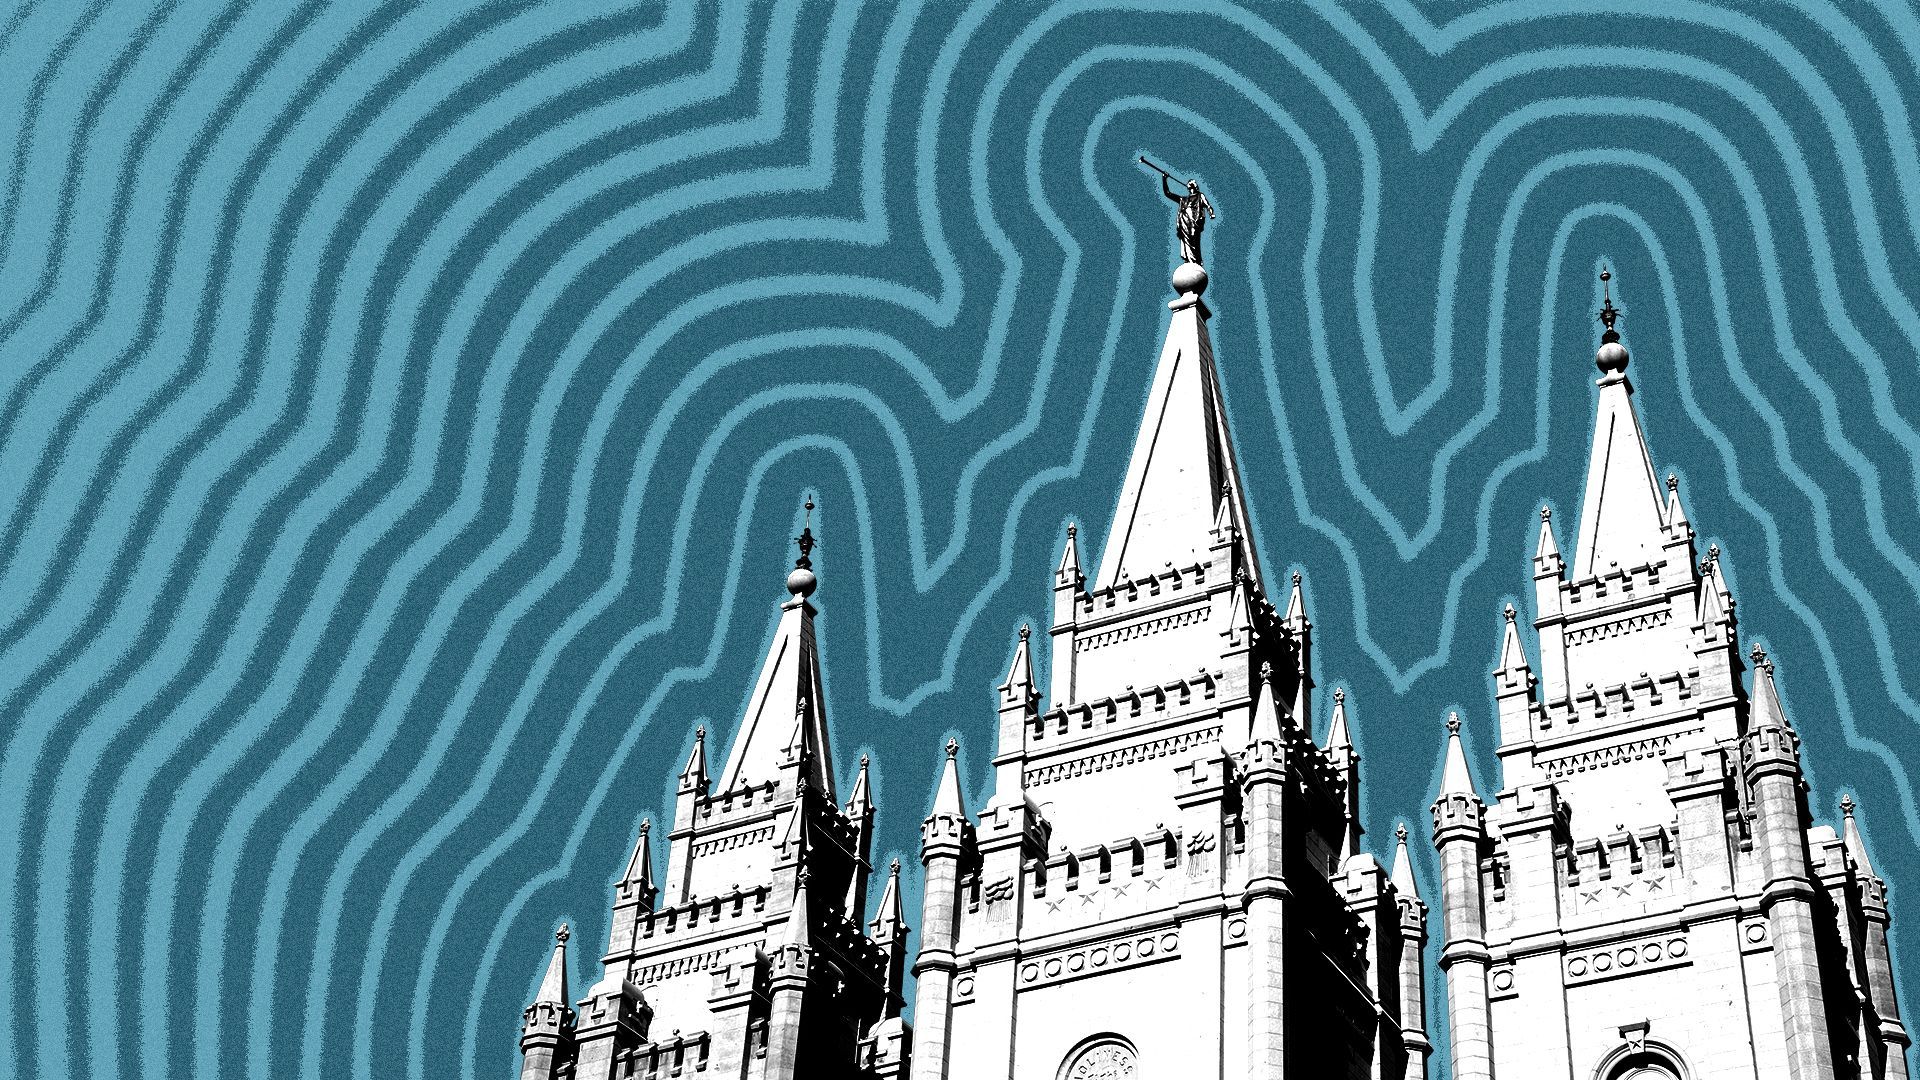 Illustration of the Salt Lake Temple with lines radiating from it.